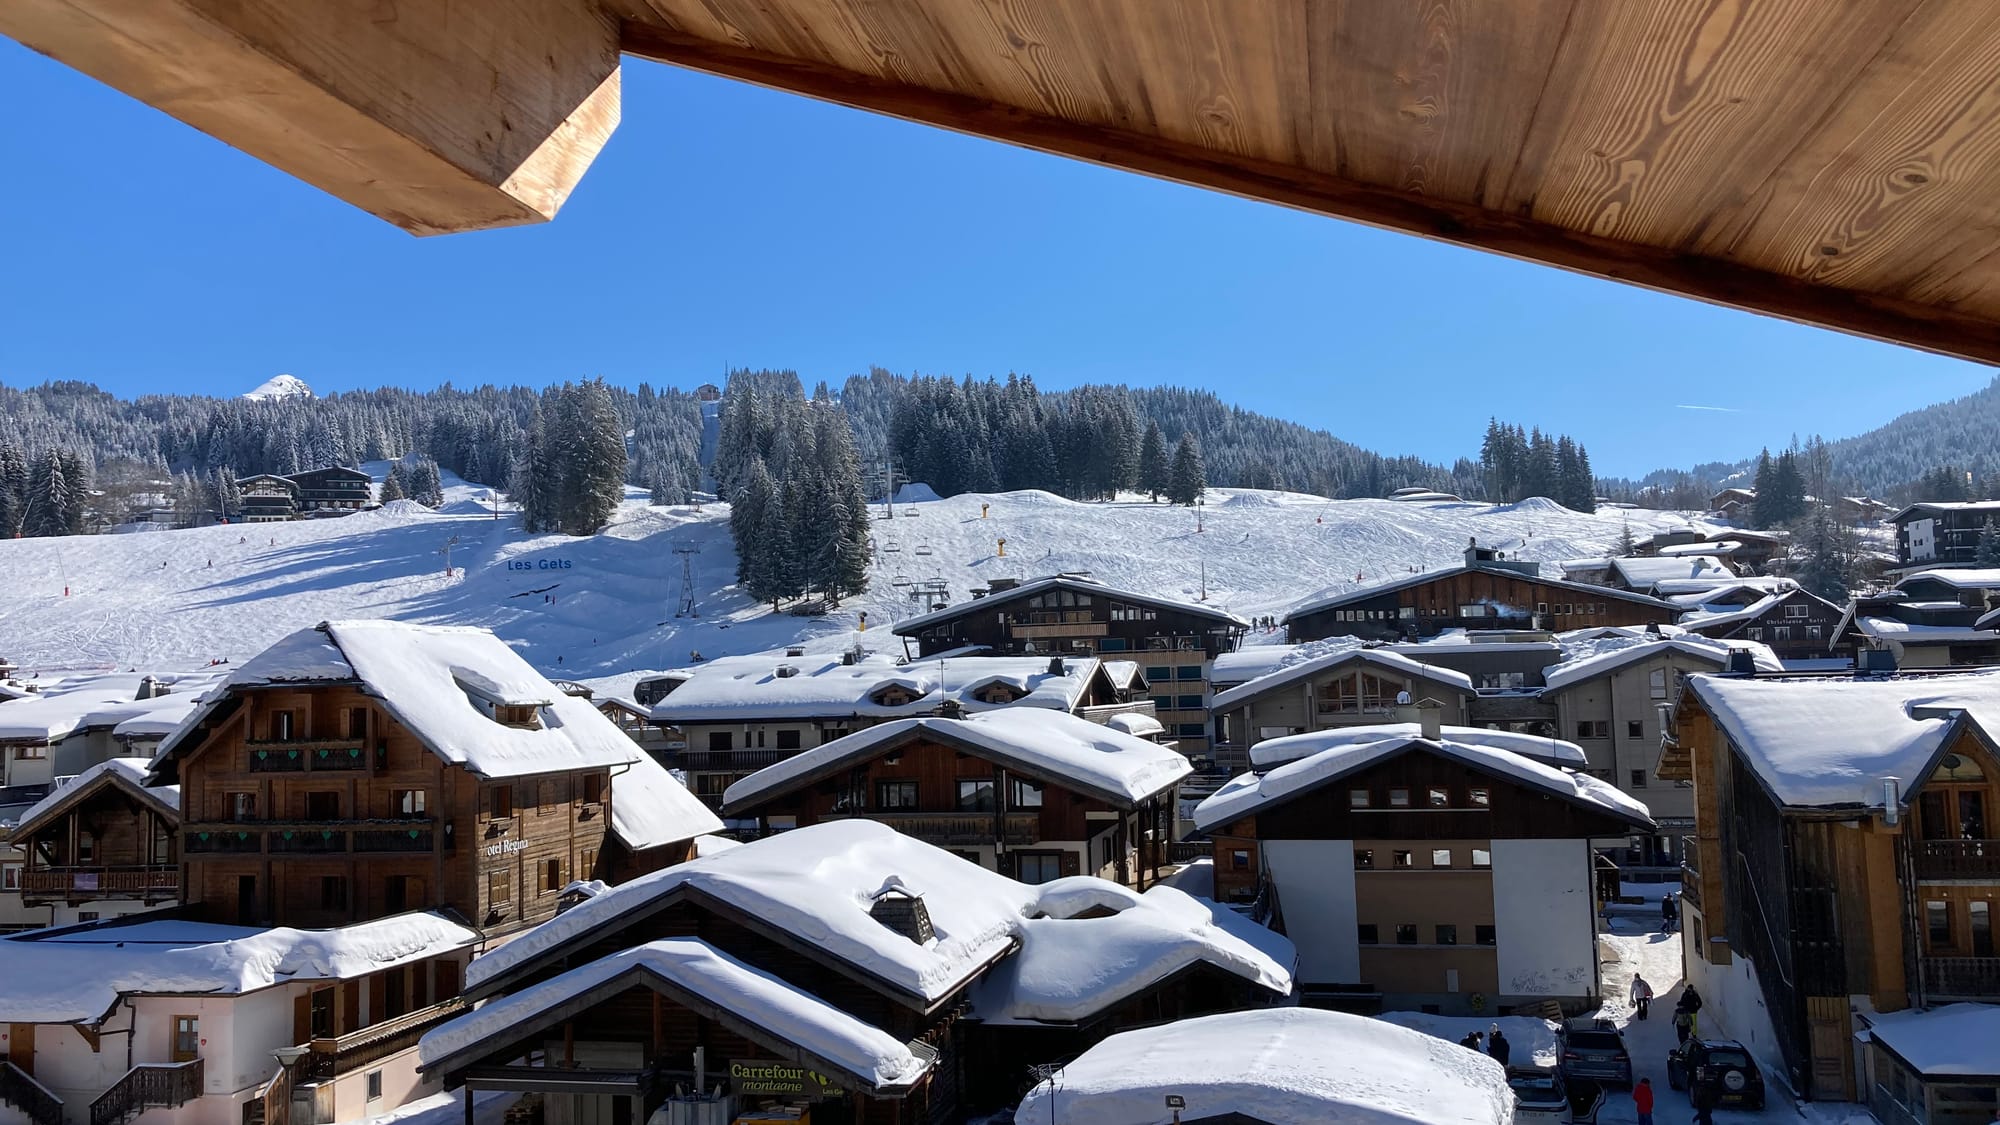 Balcony with view on snowy village and ski slopes